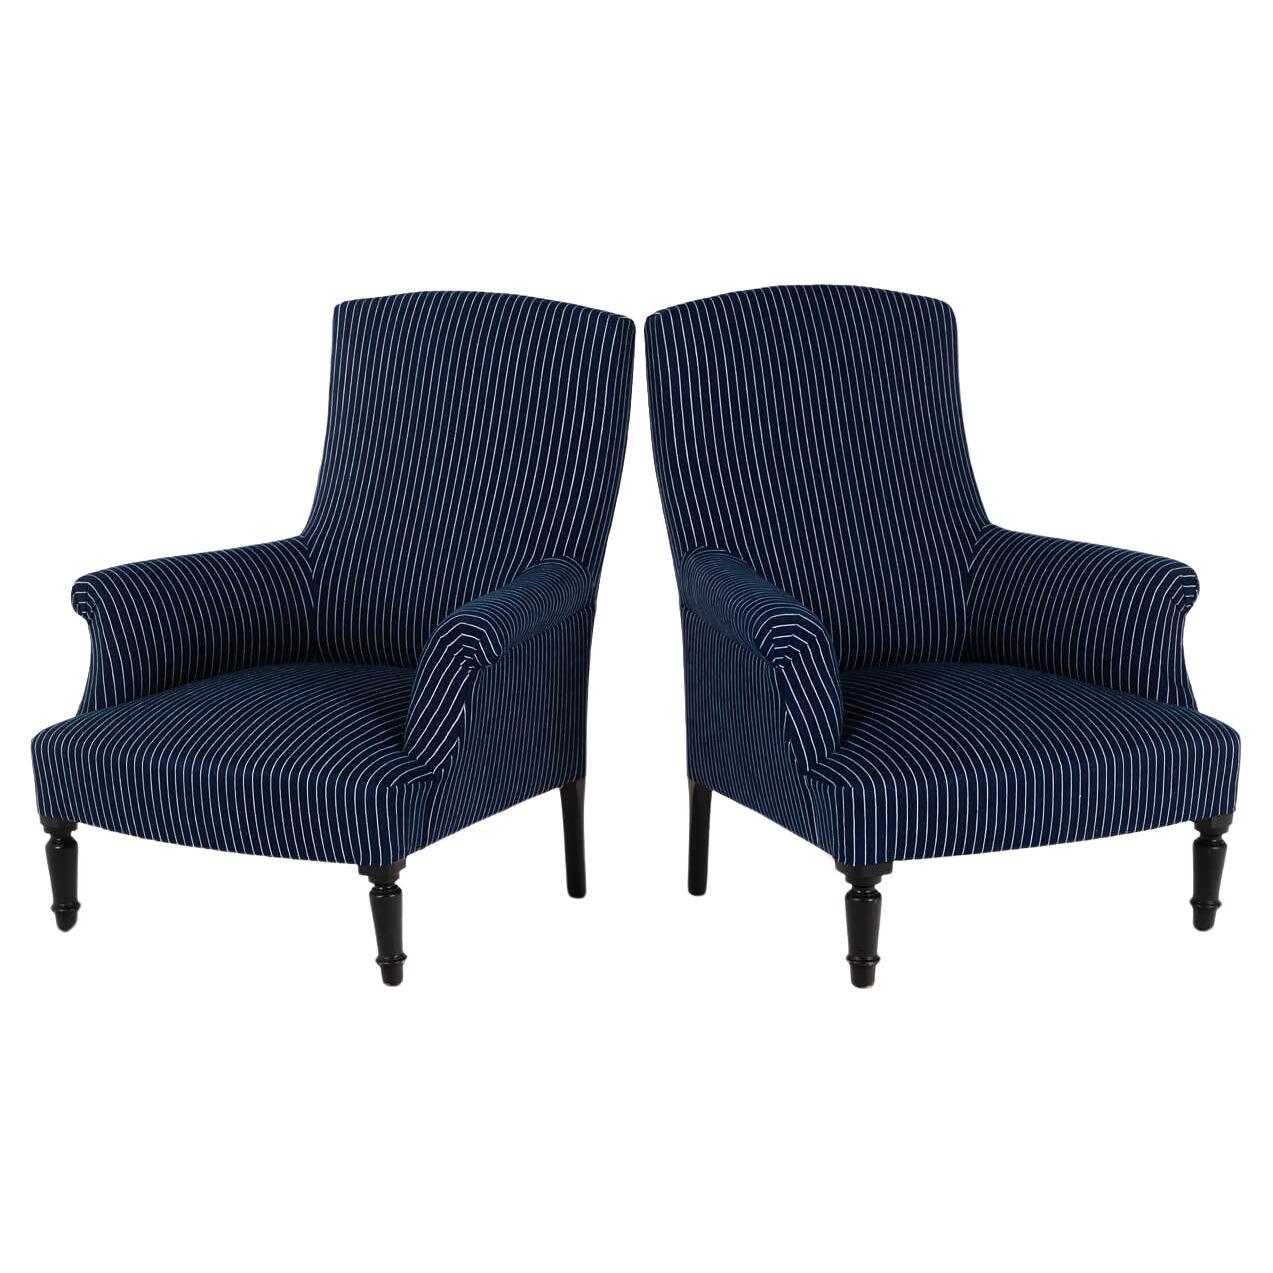 Pair of Napoleon armchairs in Woven Navy Stripe For Sale